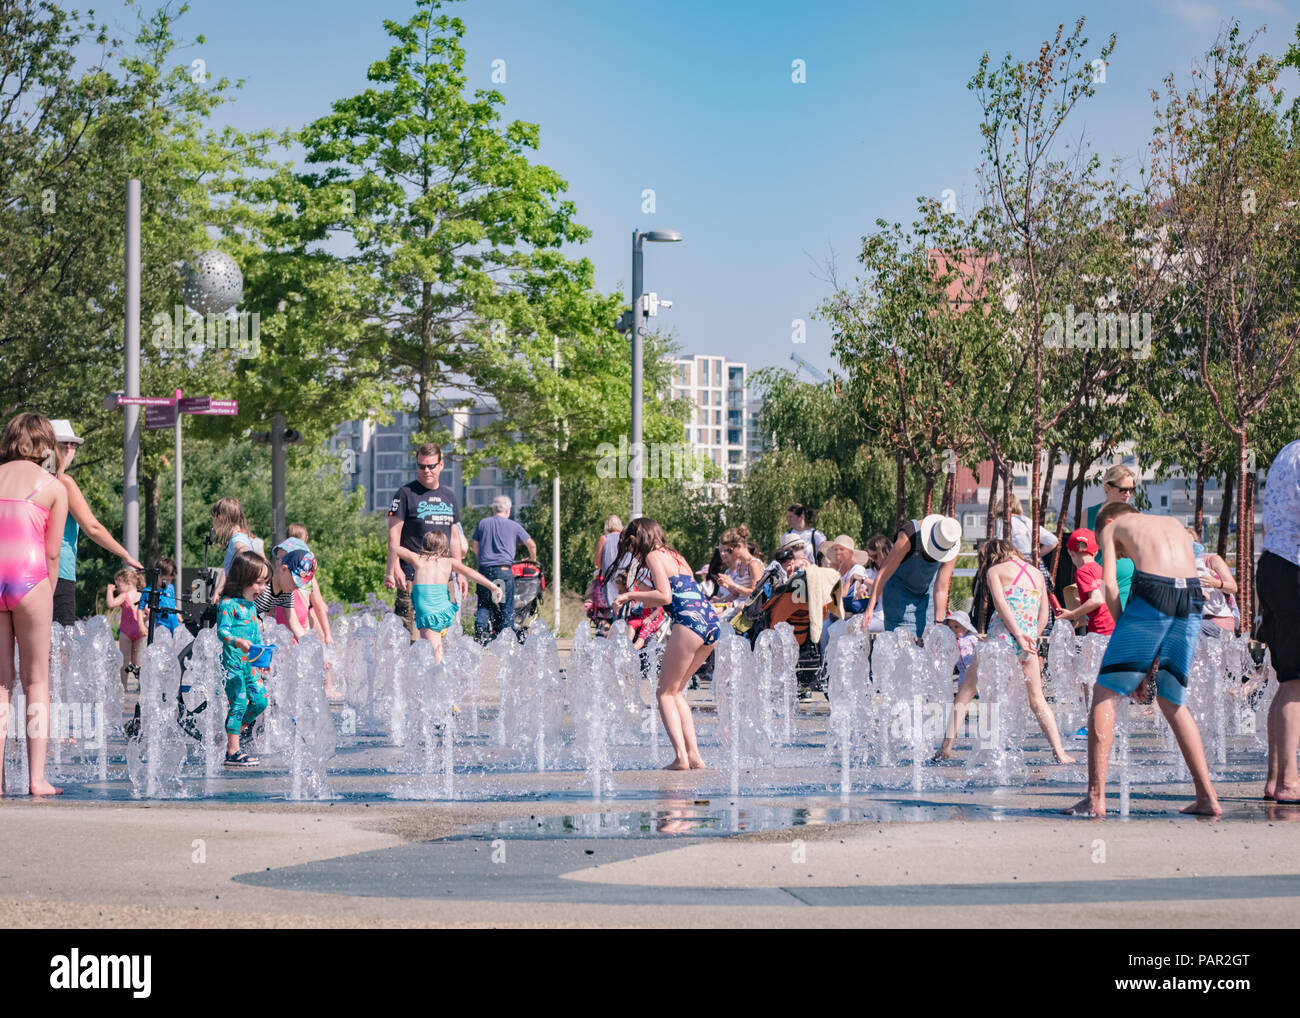 Children playing in the splash fountains at Queen Elizabeth Olympic Park, Stratford, East London, during the summer heatwave of 2018 Stock Photo